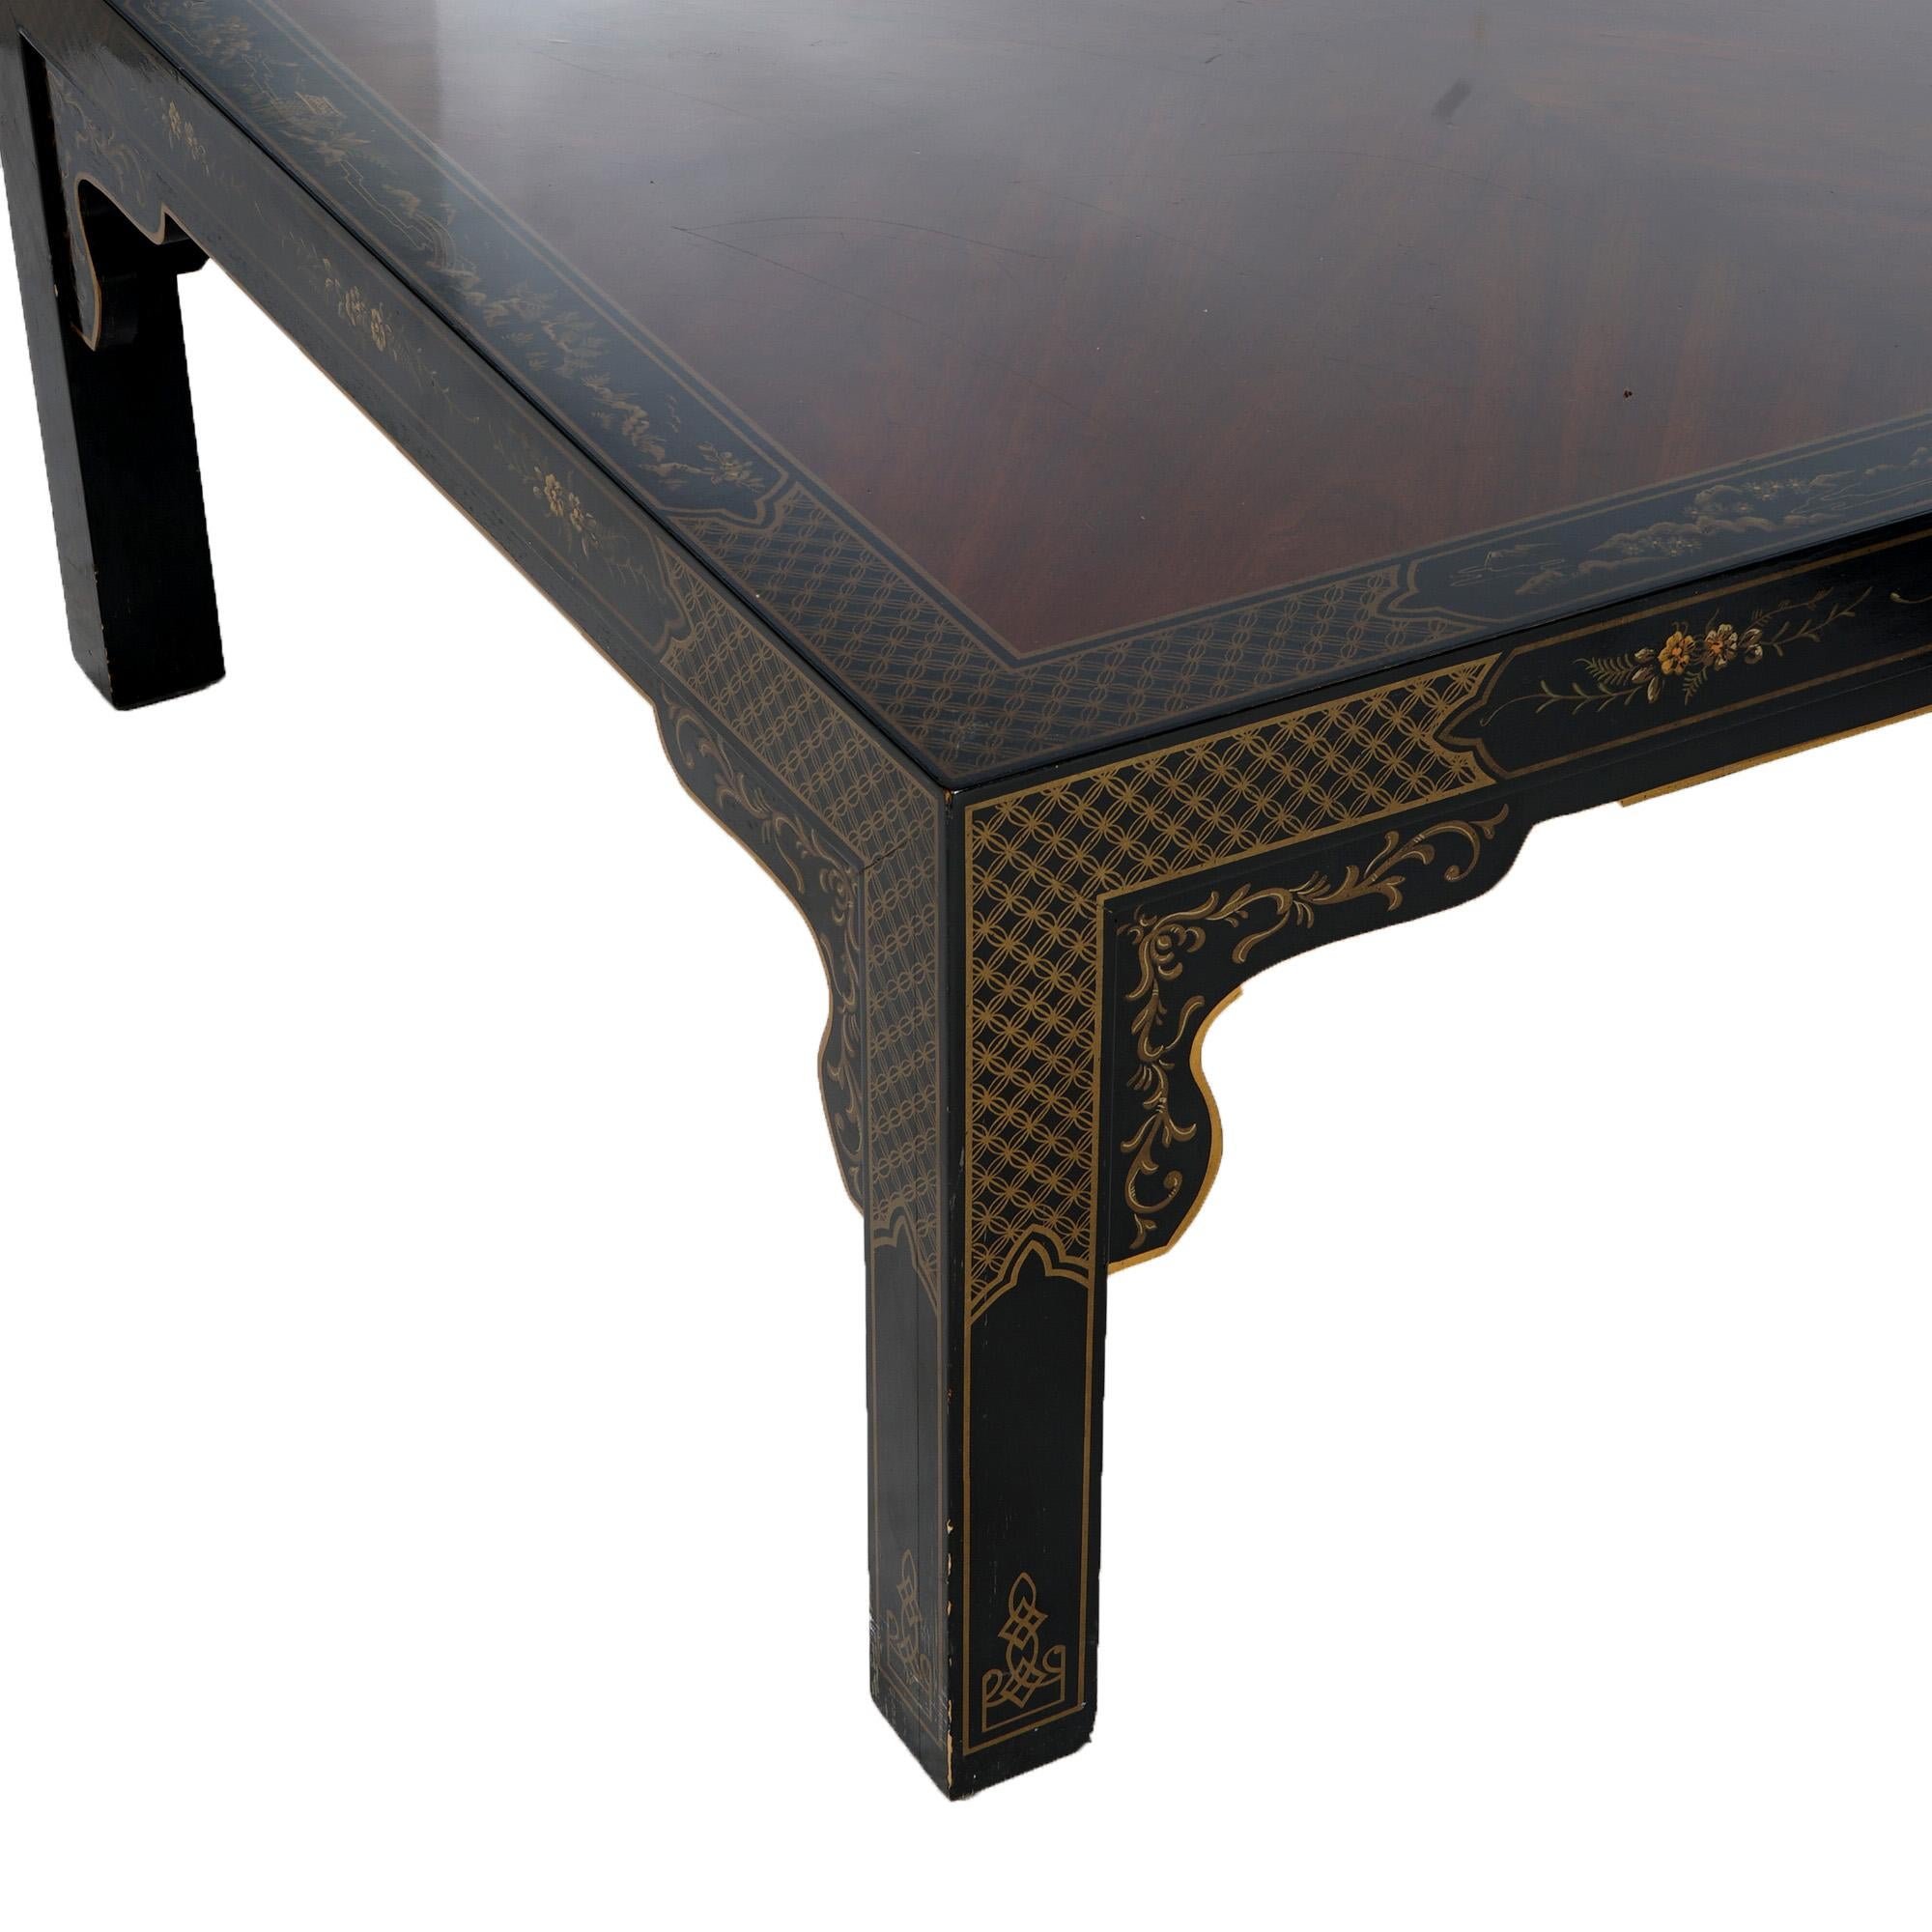  Drexel Heritage Mahogany And Ebonized Chinoiserie Decorated Low Table C1950 For Sale 1